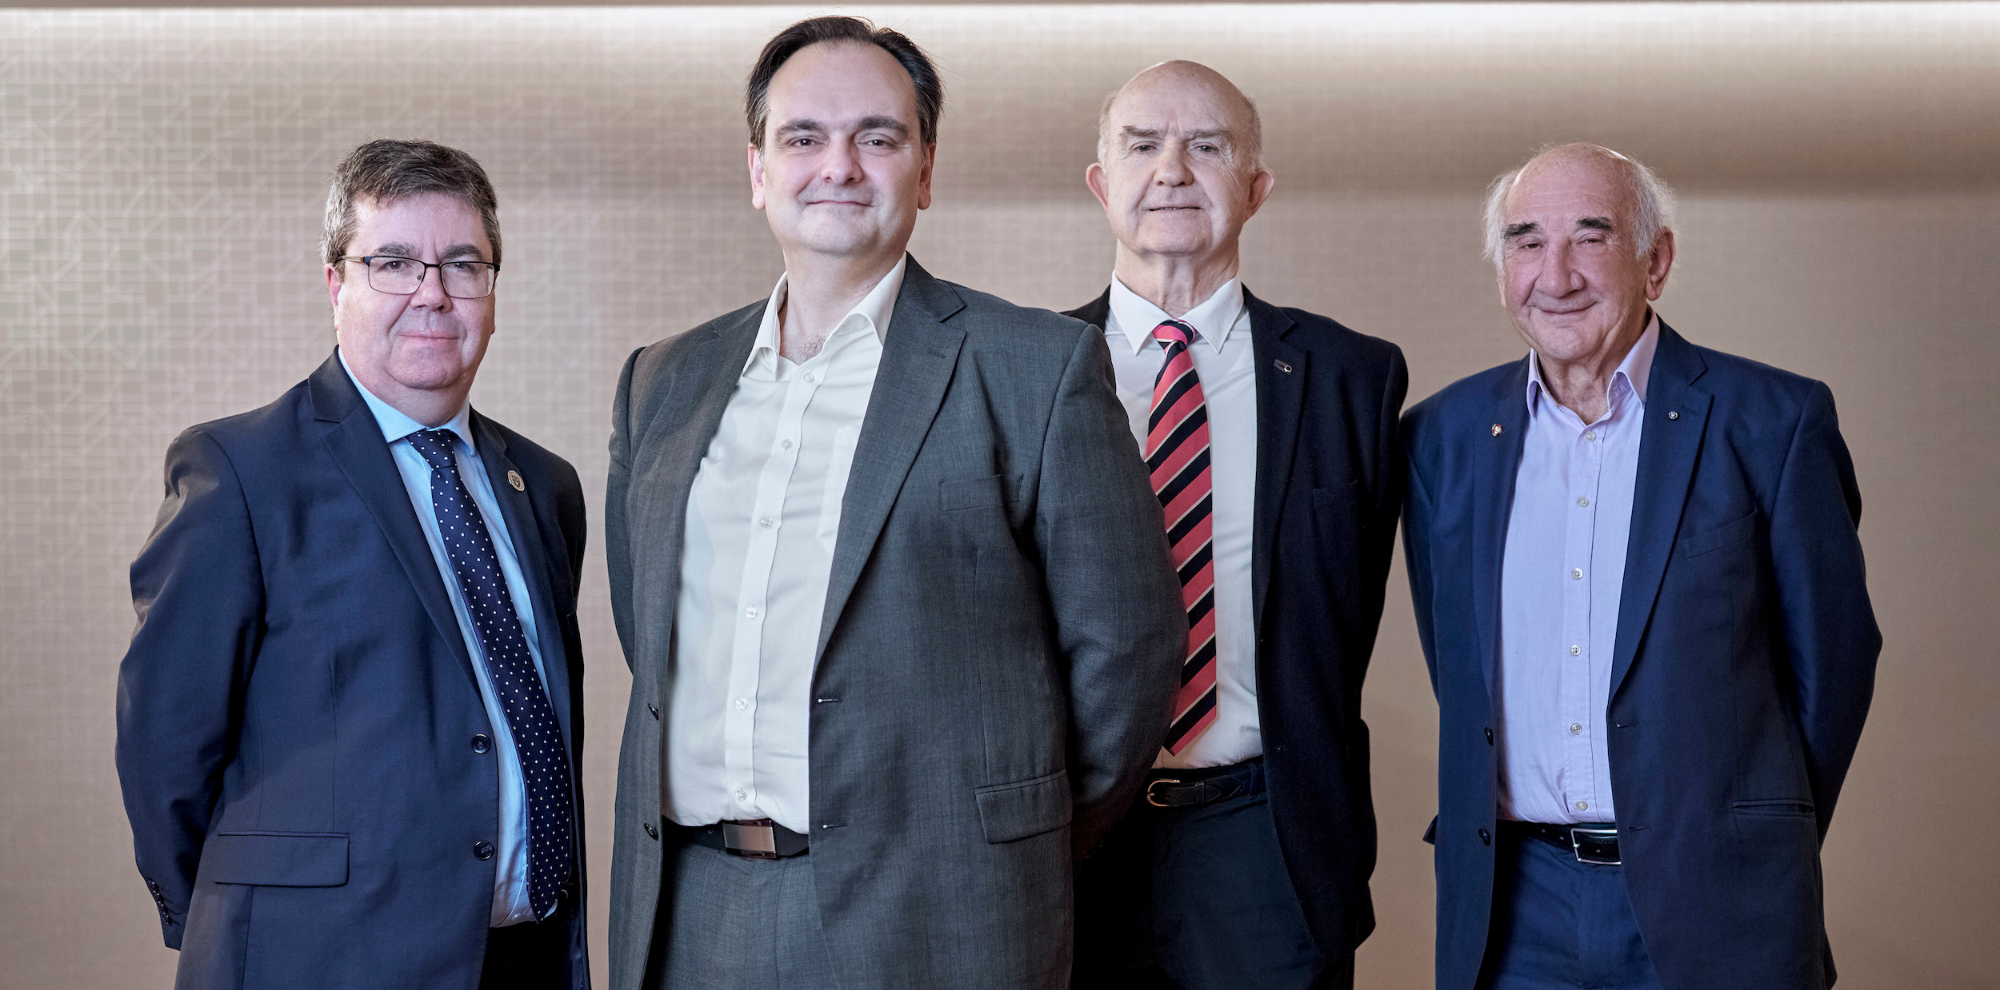 L-R Professor Andy Long of Northumbria University with Professor Sterghios A. Moschos, Dr Huw Edwards and Professor Sir Peter J. Barnes of PulmoBioMed.